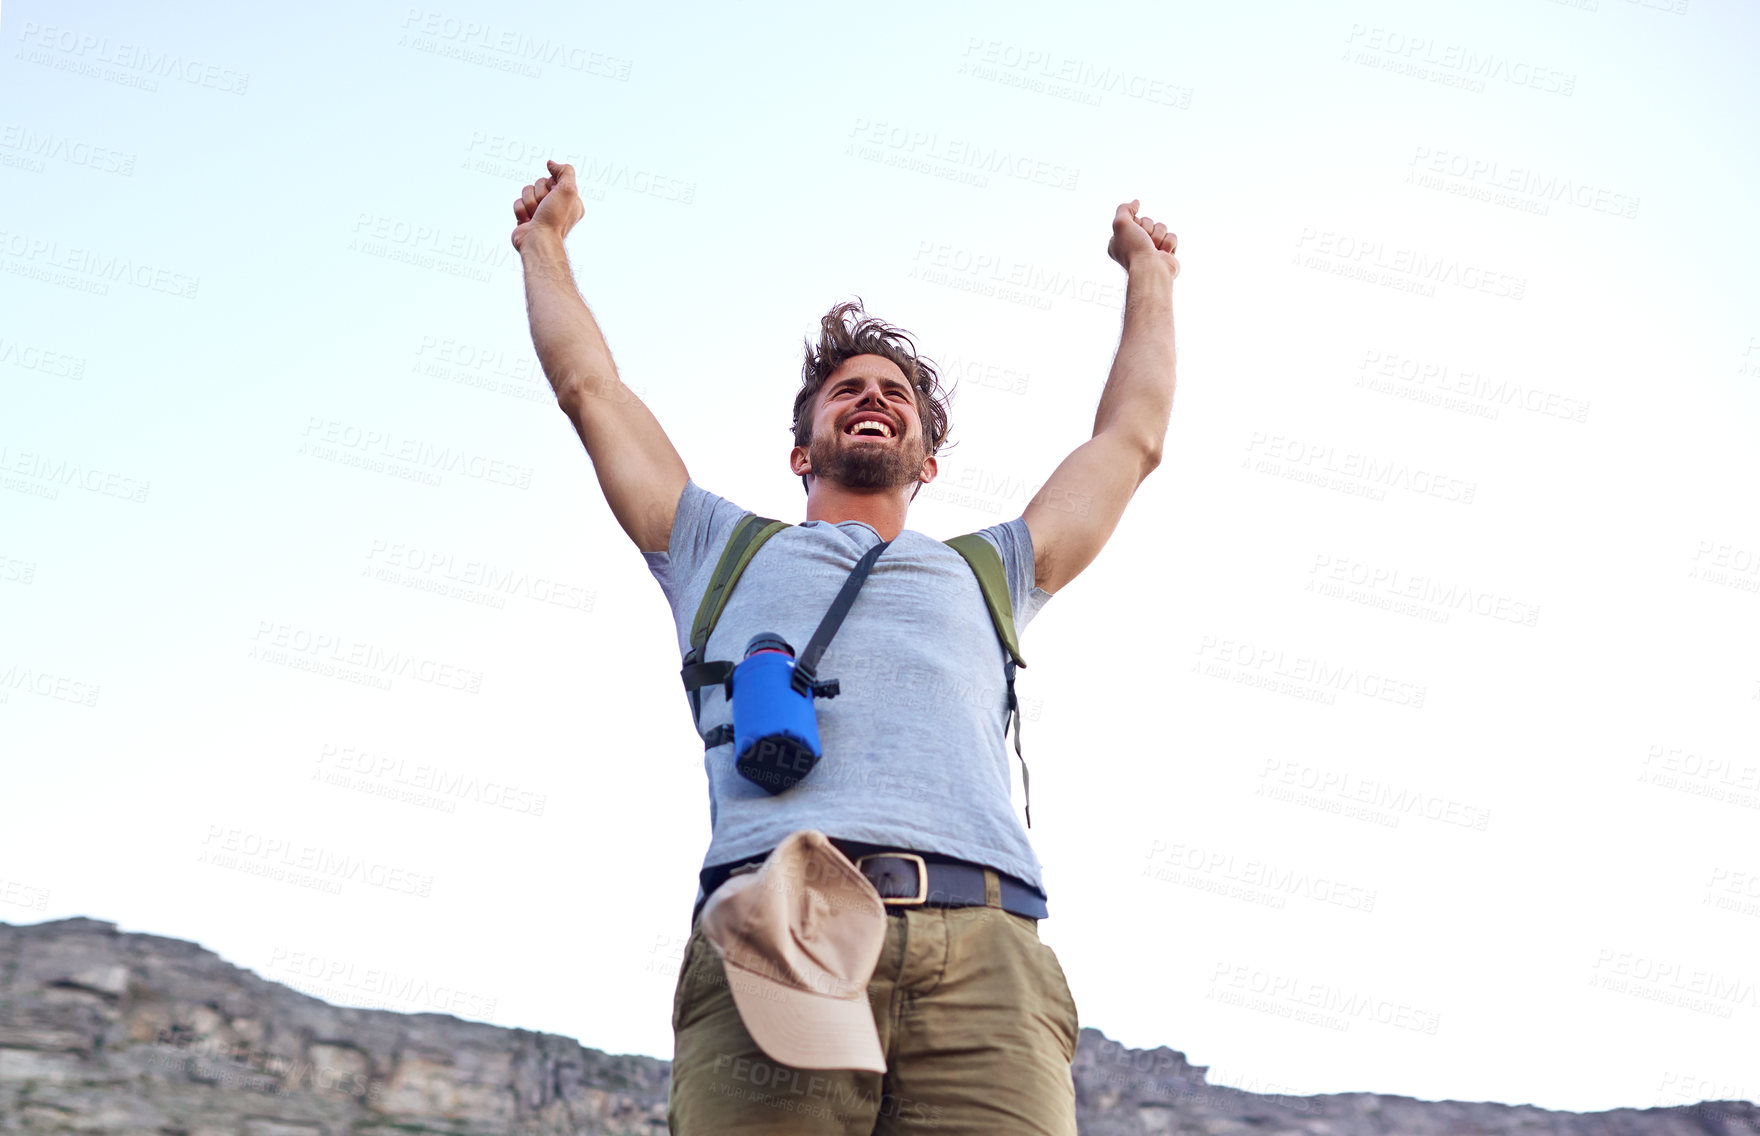 Buy stock photo Shot of a handsome young man standing with his arms raised while hiking